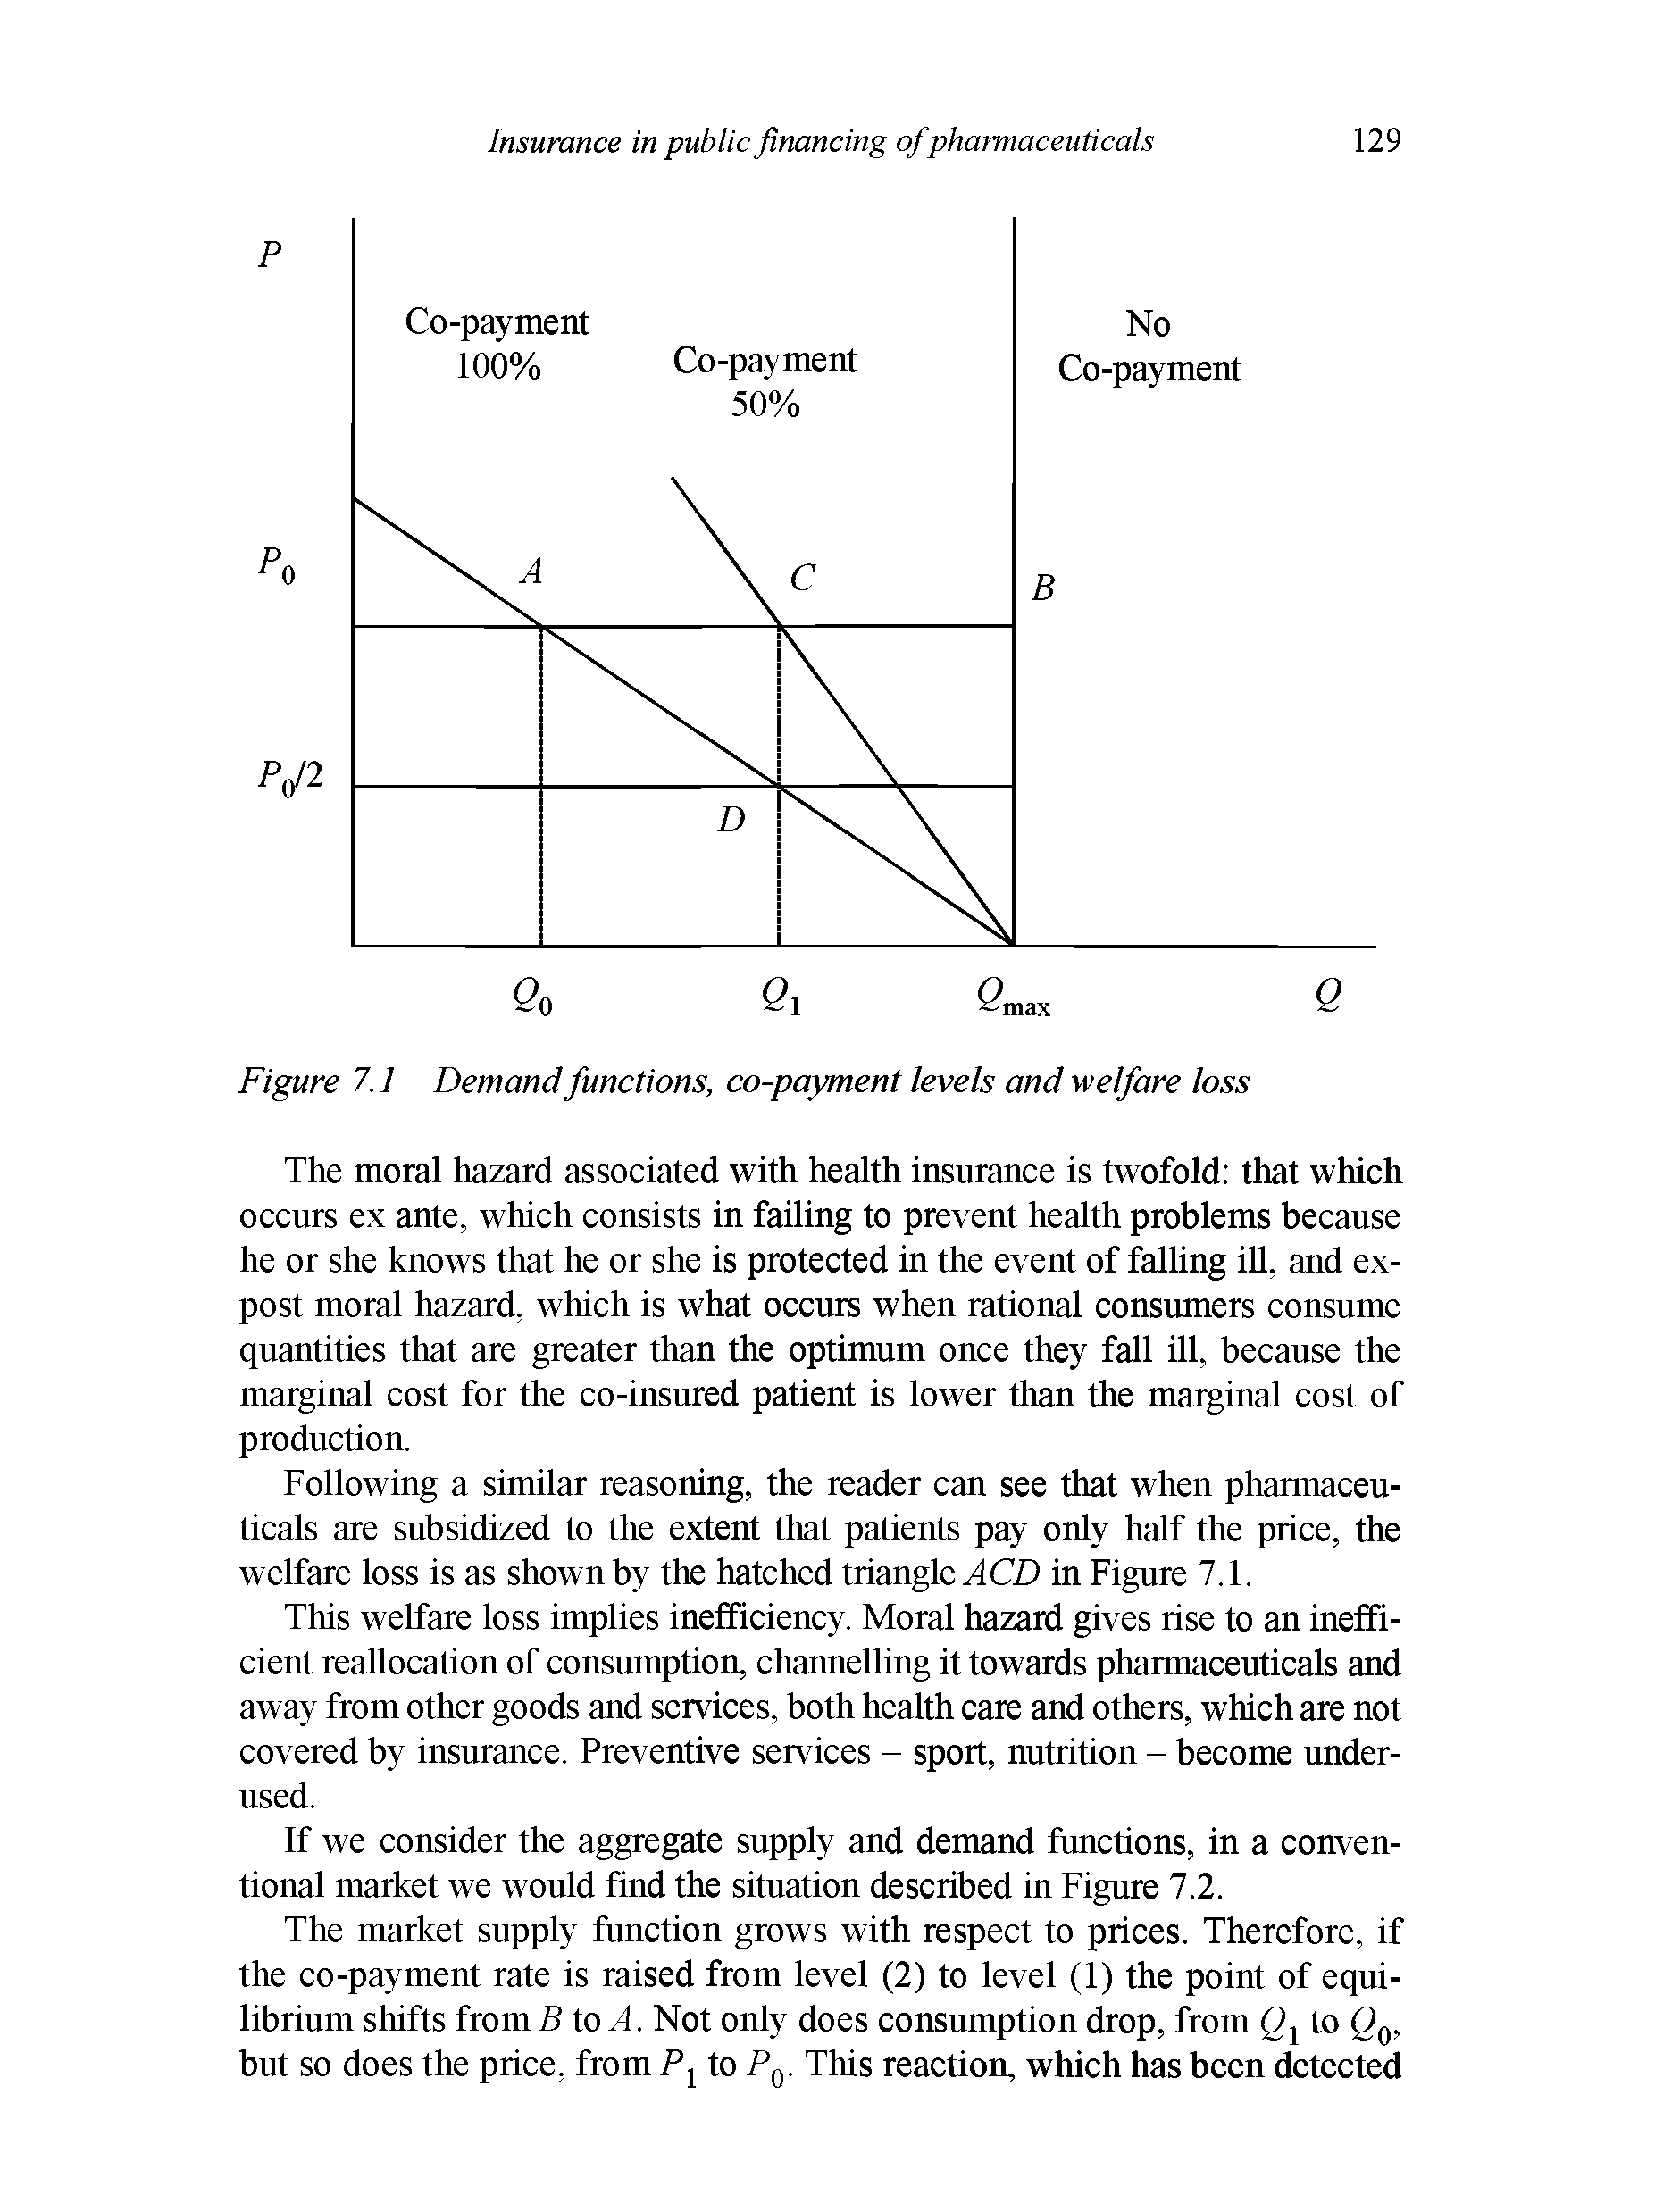 Figure 7.1 Demand functions, co-payment levels and welfare loss...